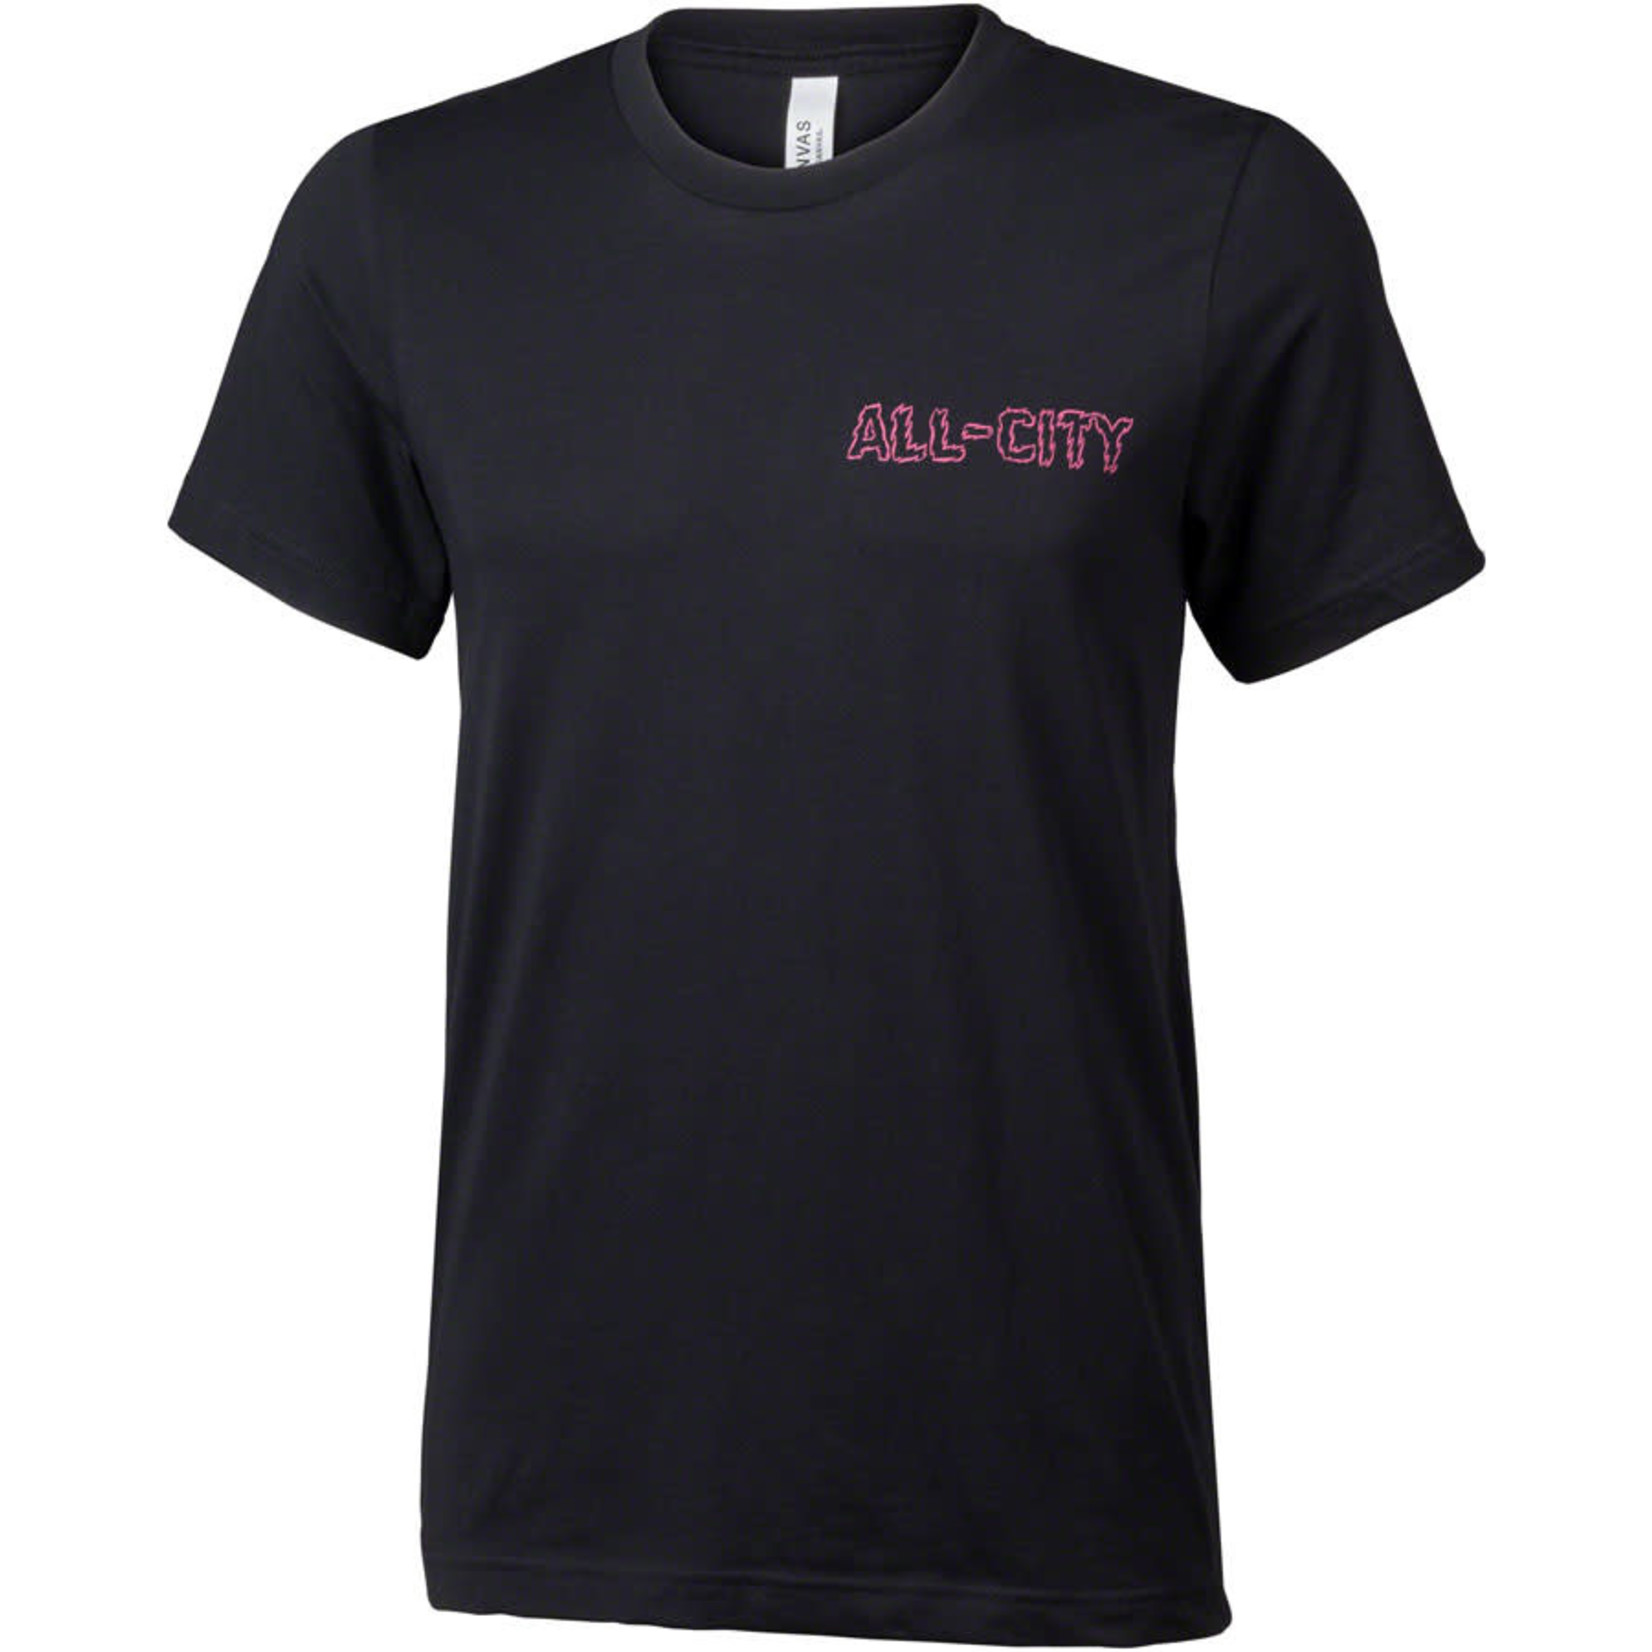 All-City All-City Night Claw Men's T-Shirt